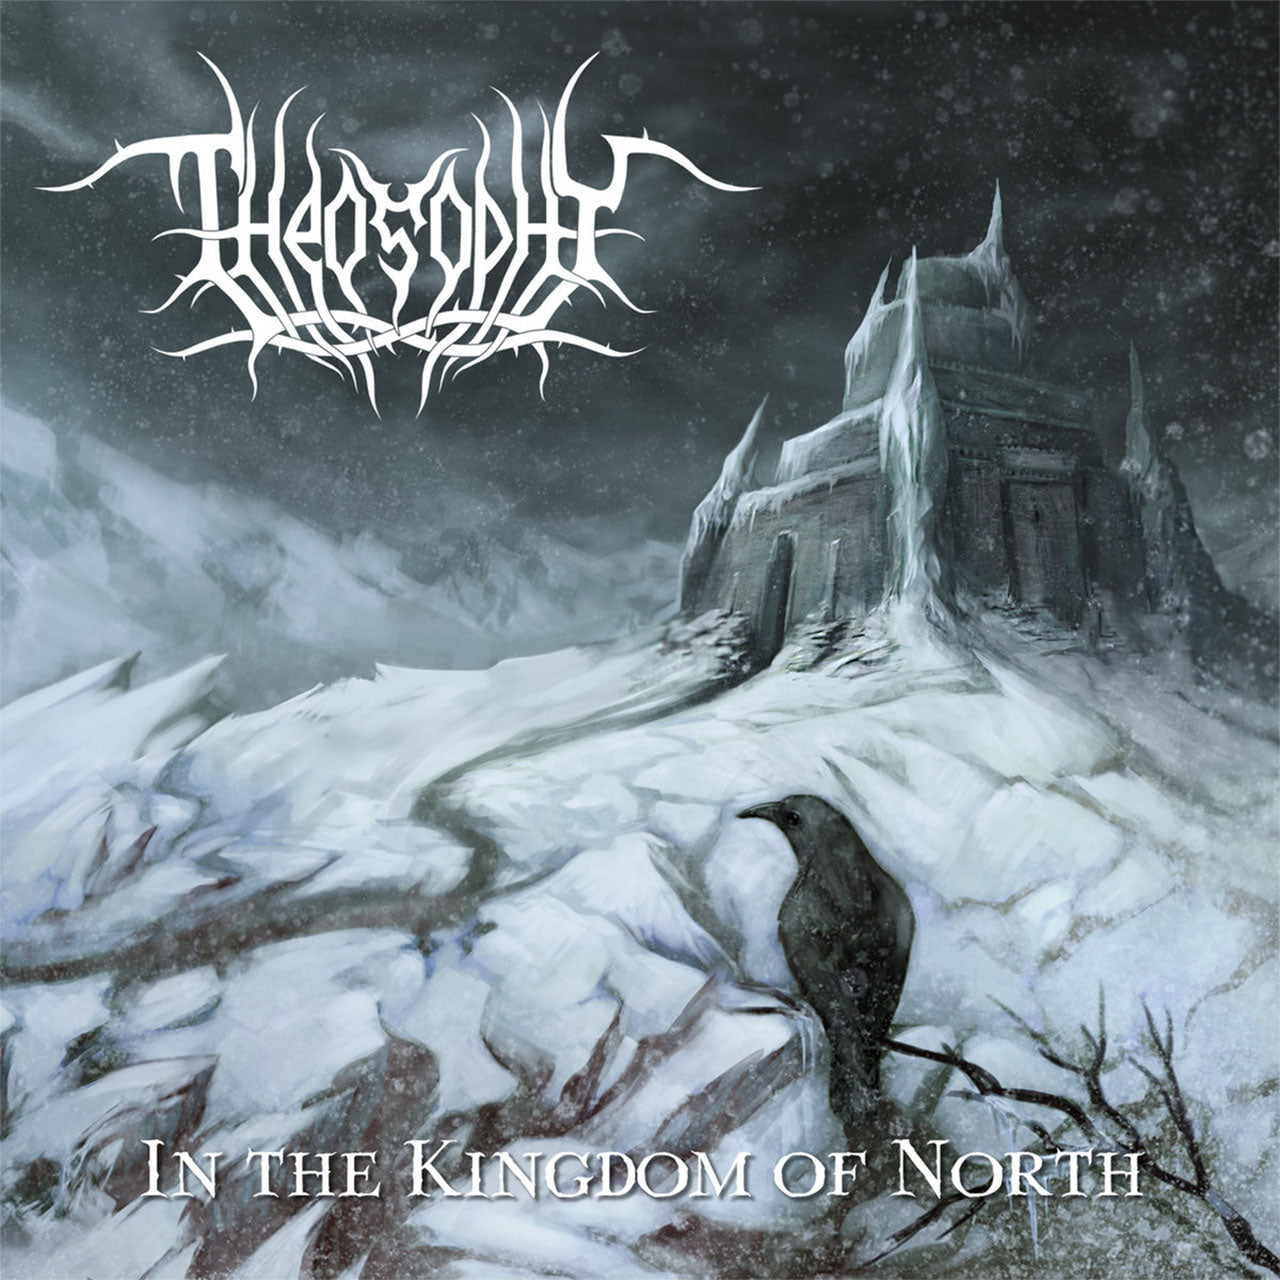 Theosophy - In the Kingdom of North (CD)